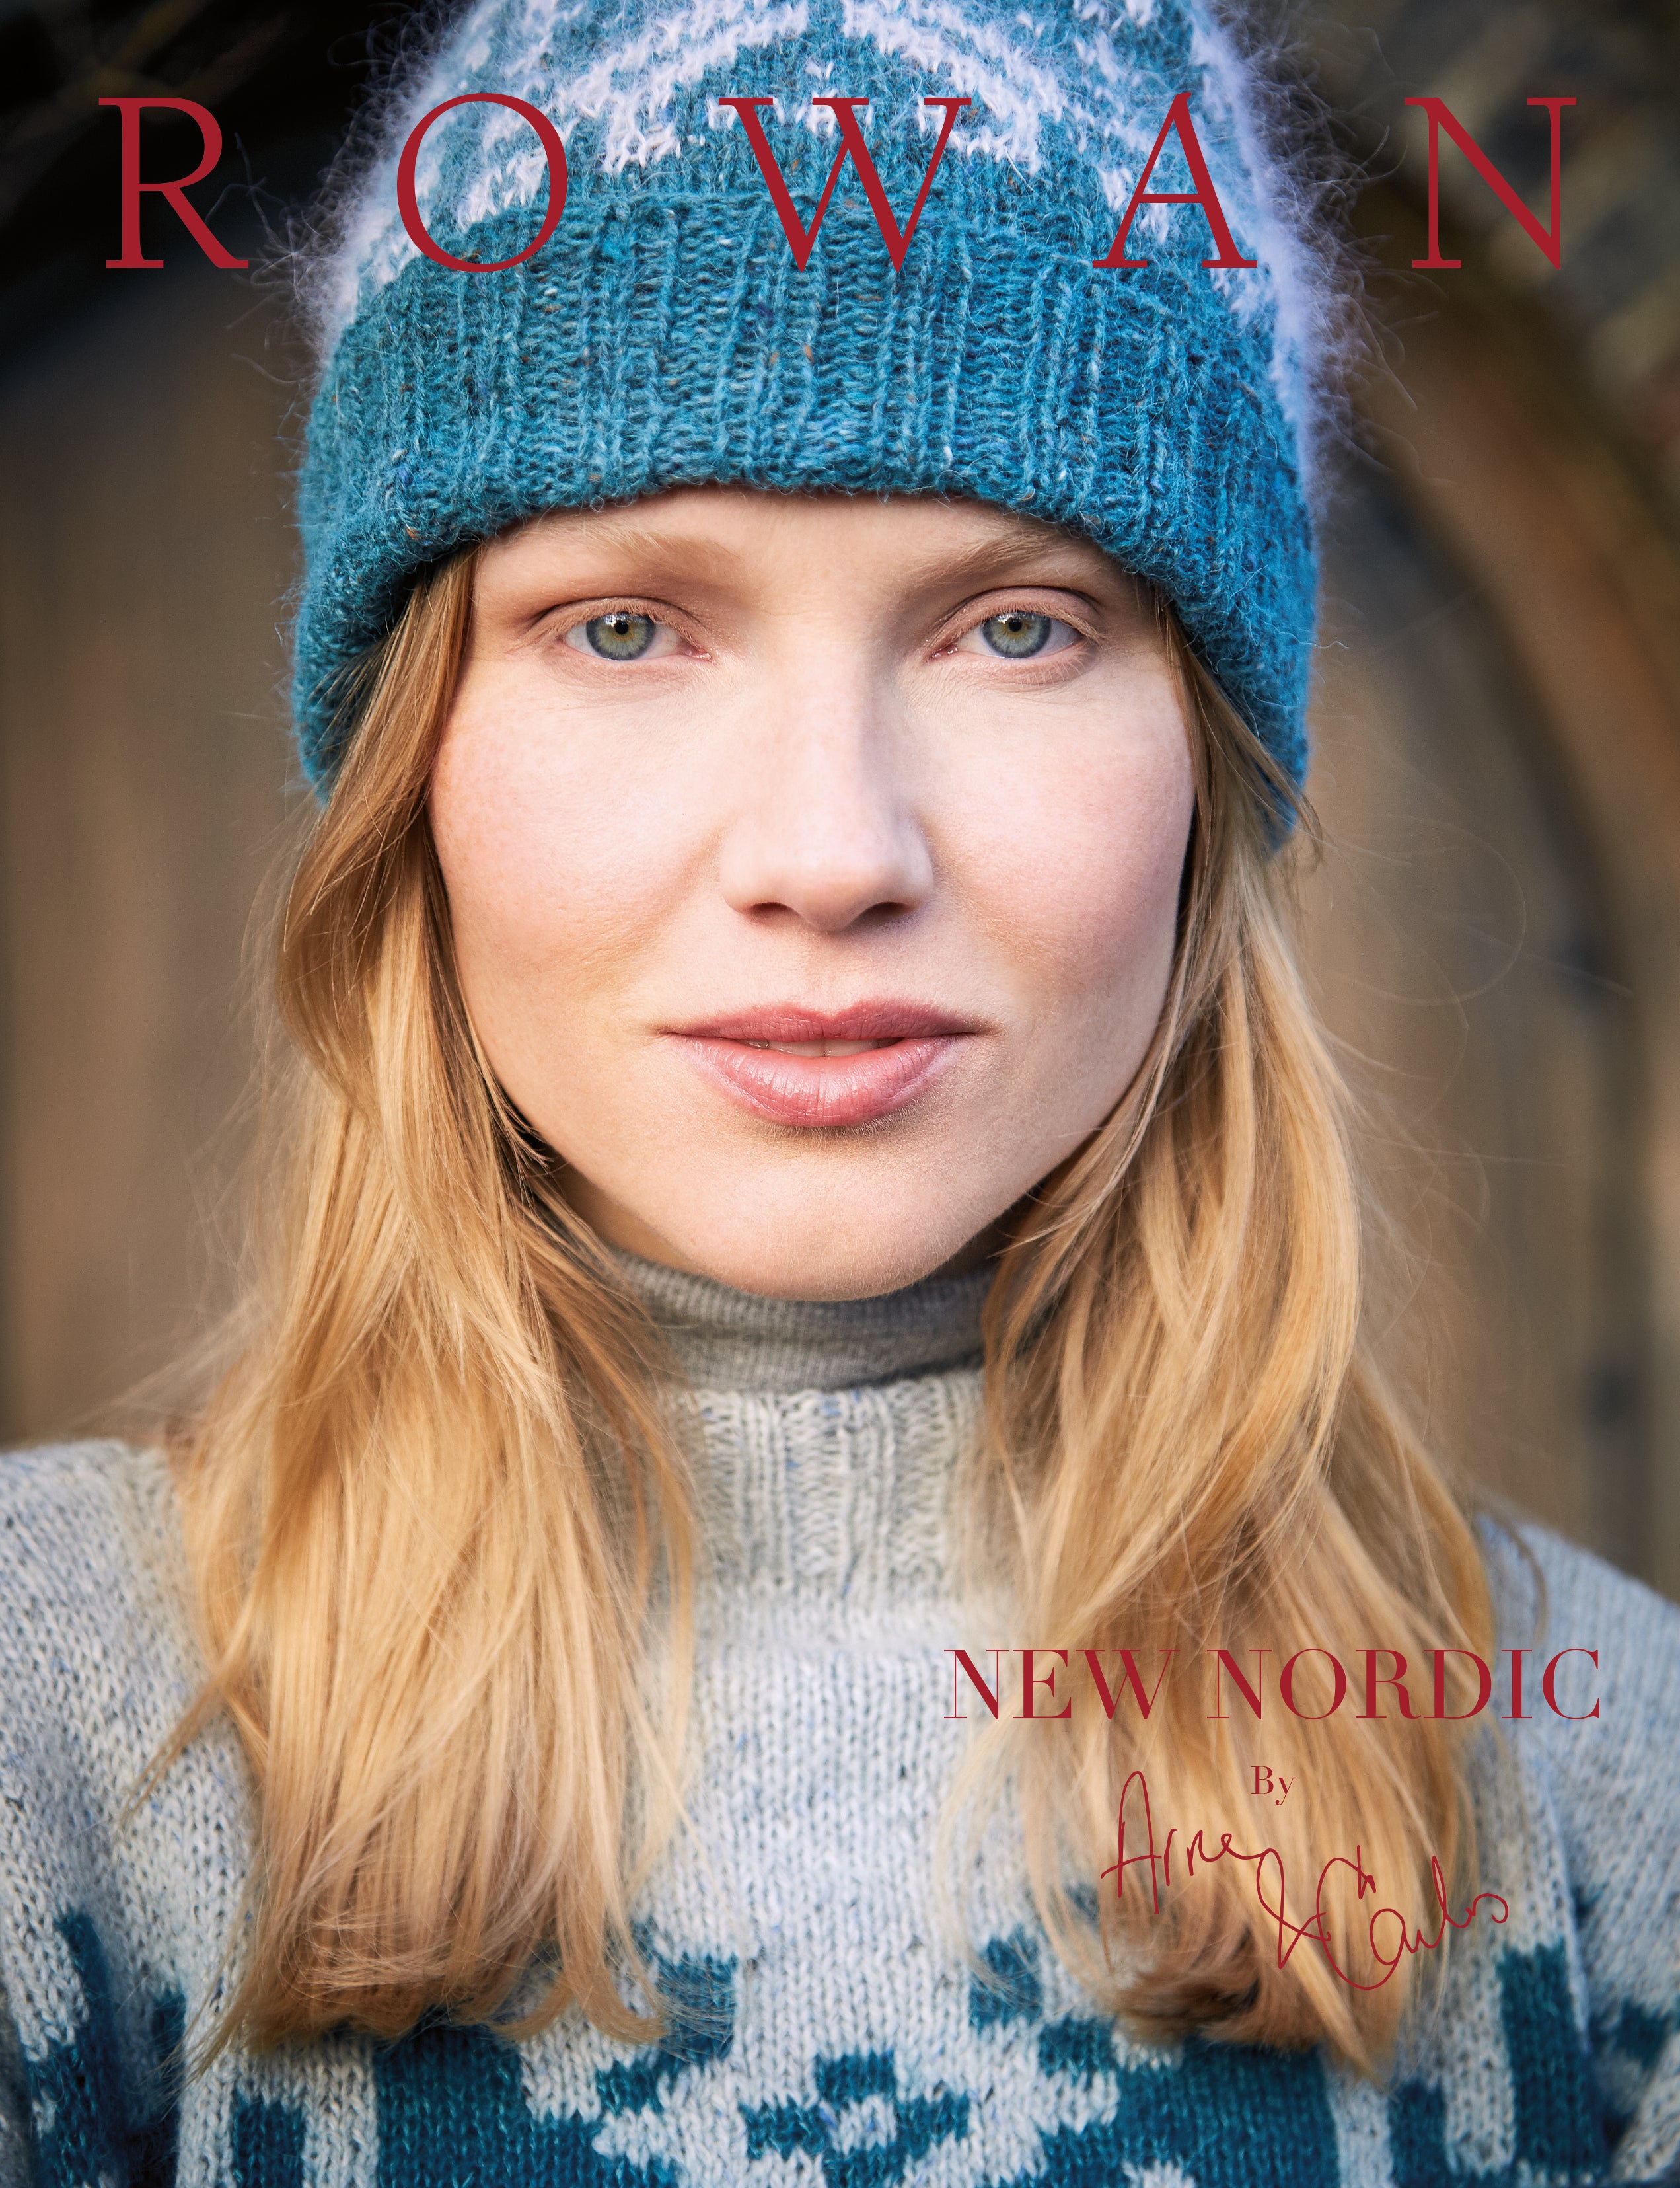 New Nordic Women's Collection